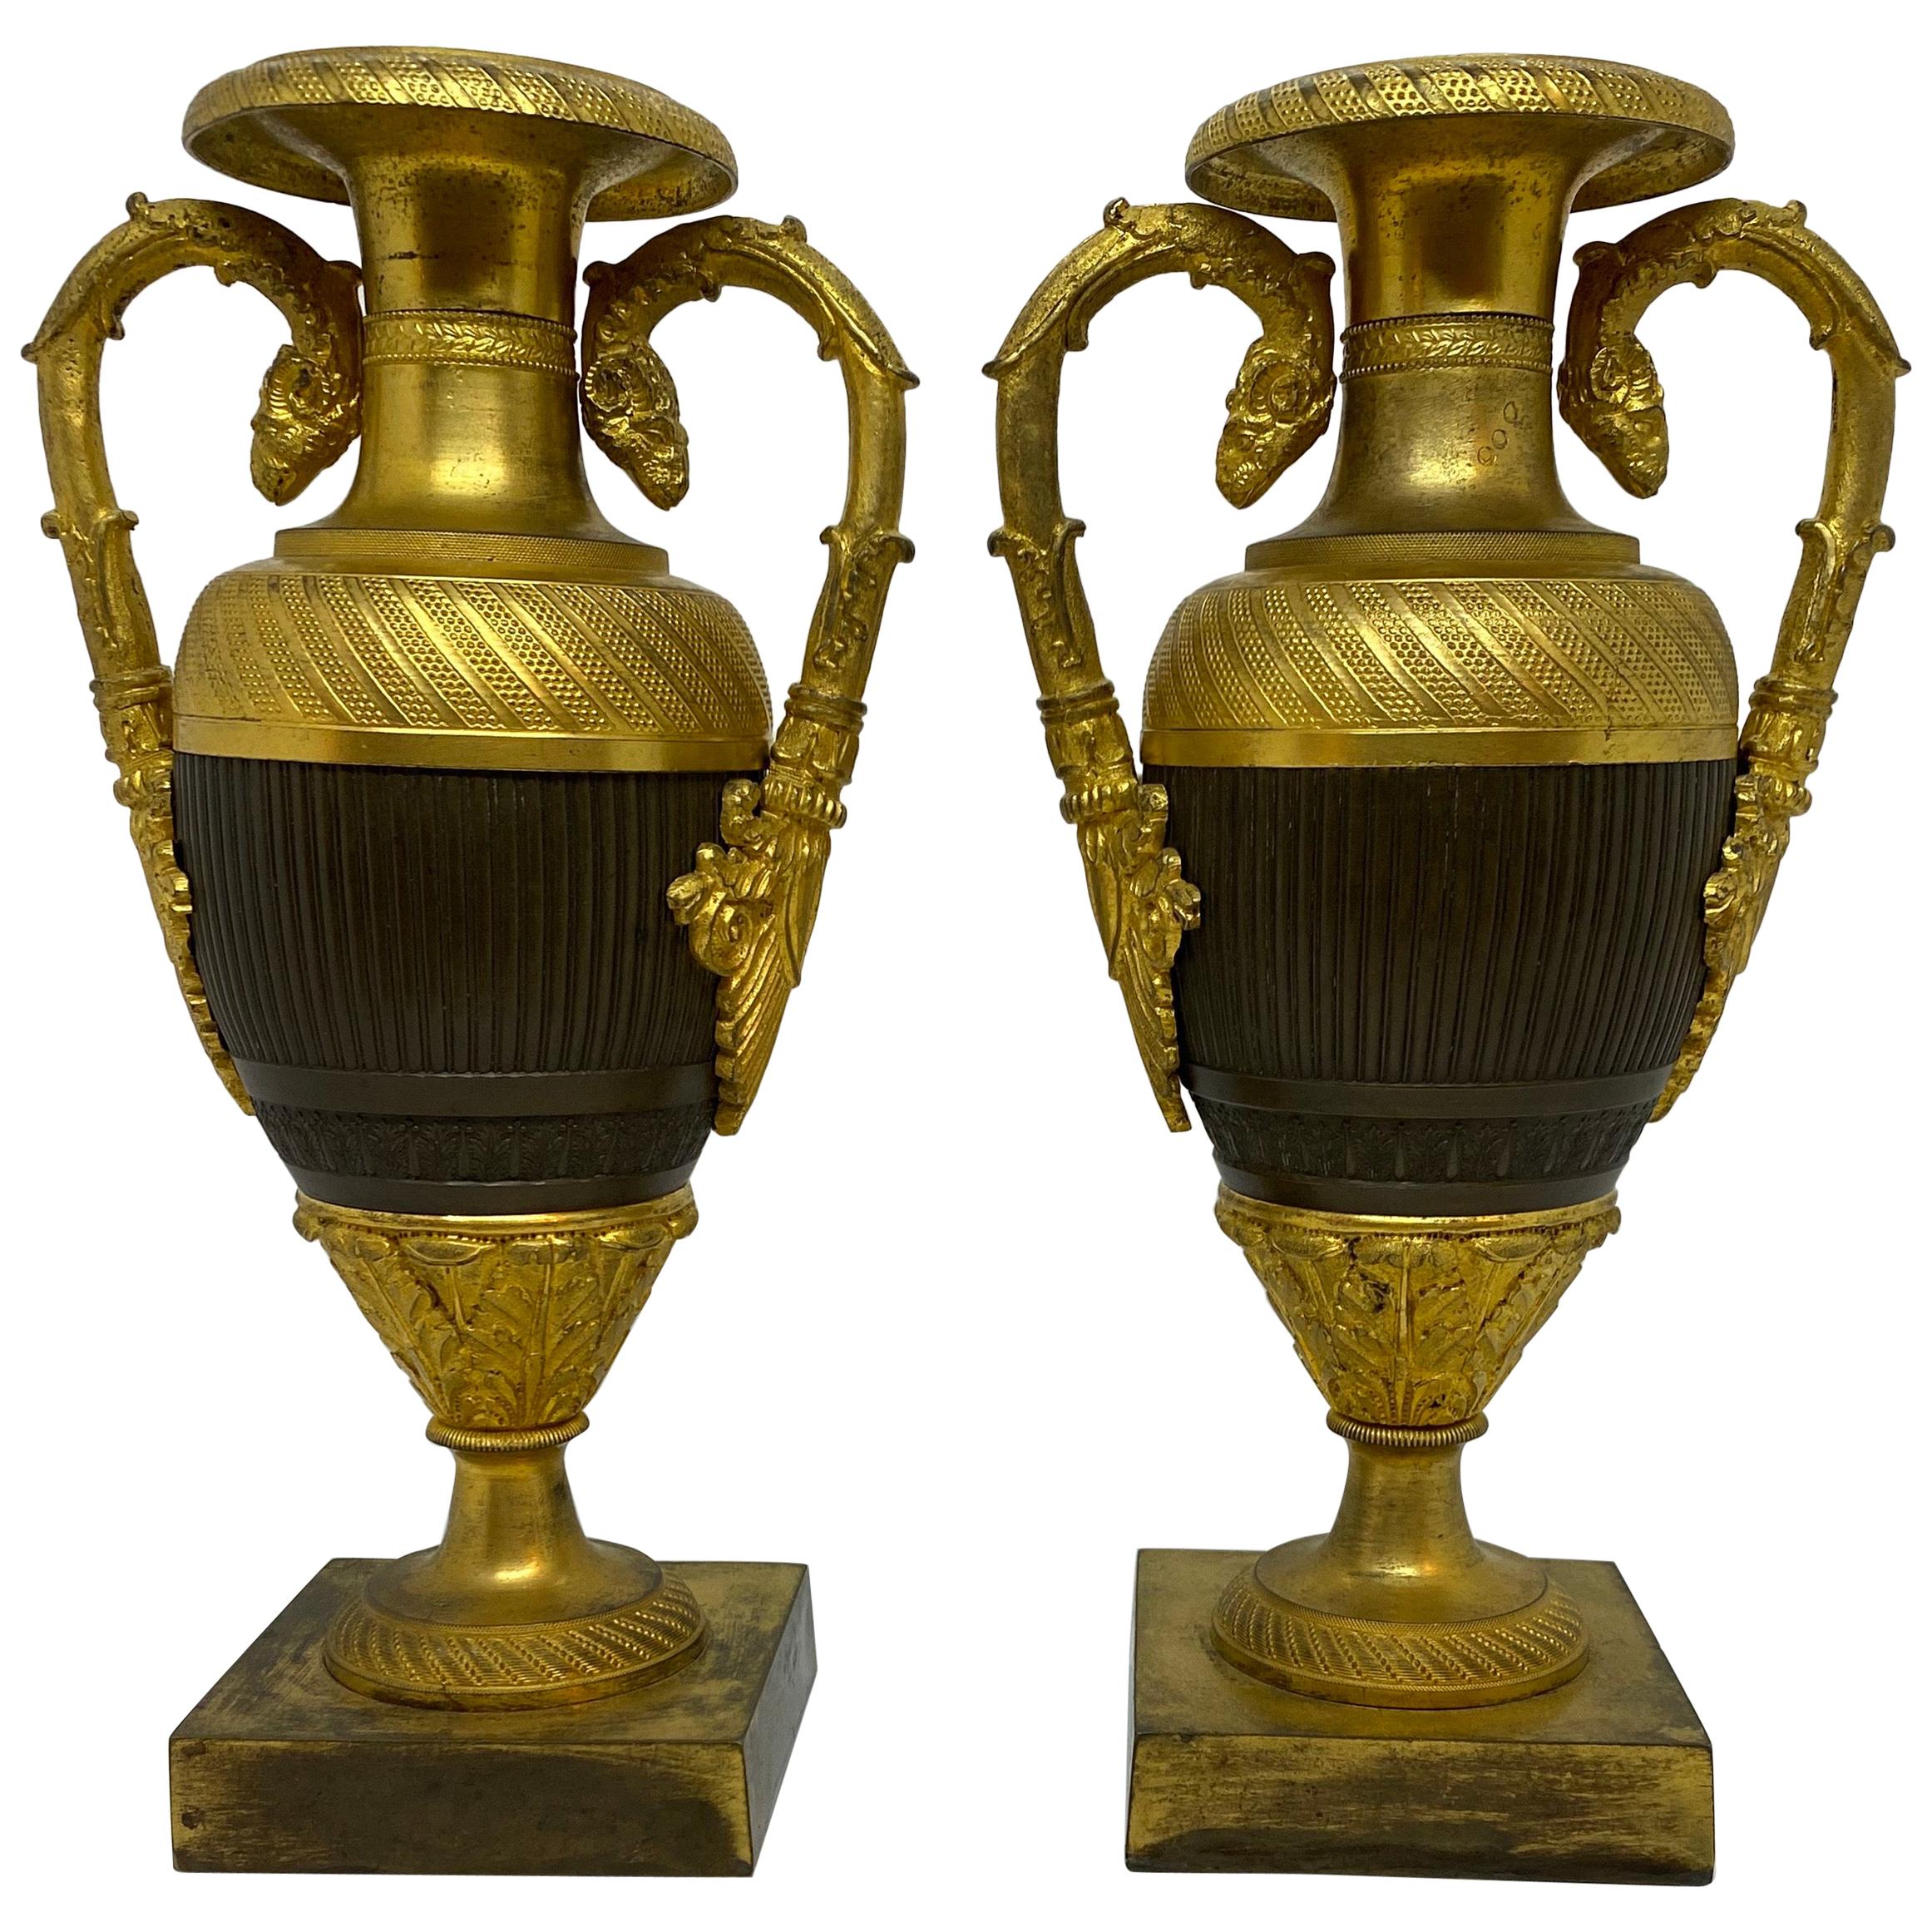 Pair of French Empire Urns For Sale